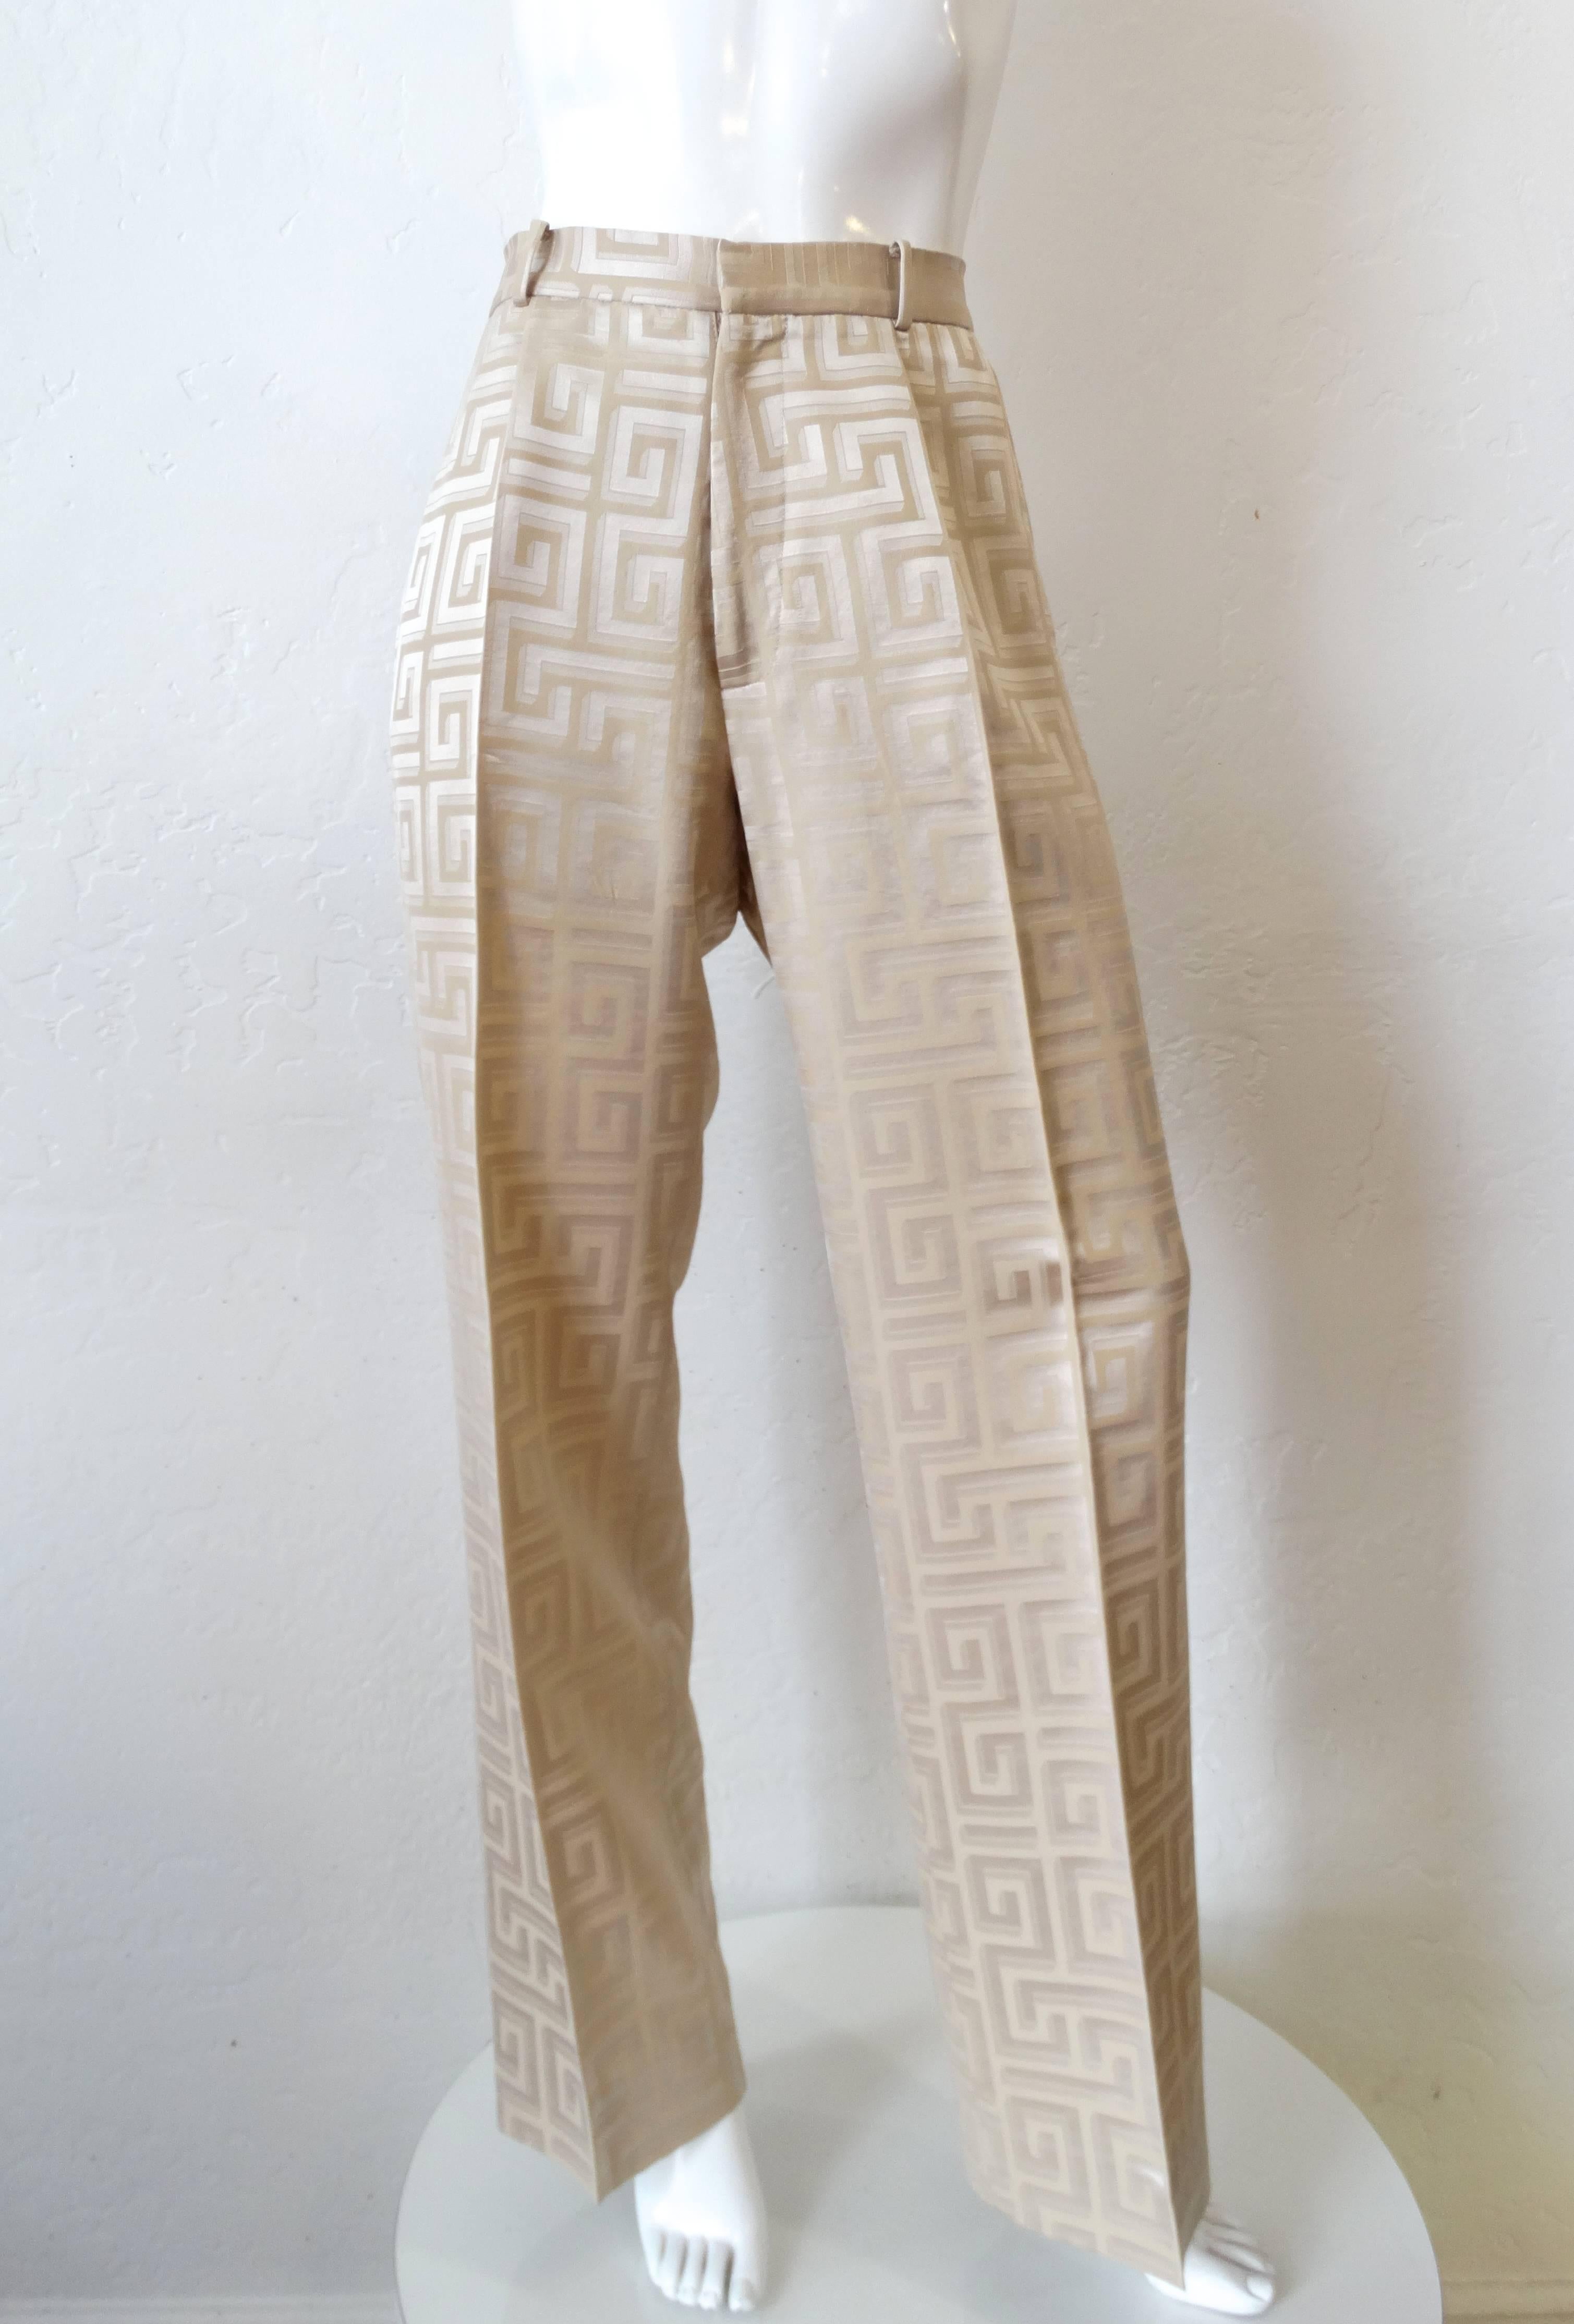 INCREDIBLE 1980s Greek Key printed suit from iconic designer Gianni Versace! Sexy high rise trouser with slightly tapered leg. Matching jacket with standard blazer fit, pockets at either side of the waist. Buttons up the front with gold metal greek